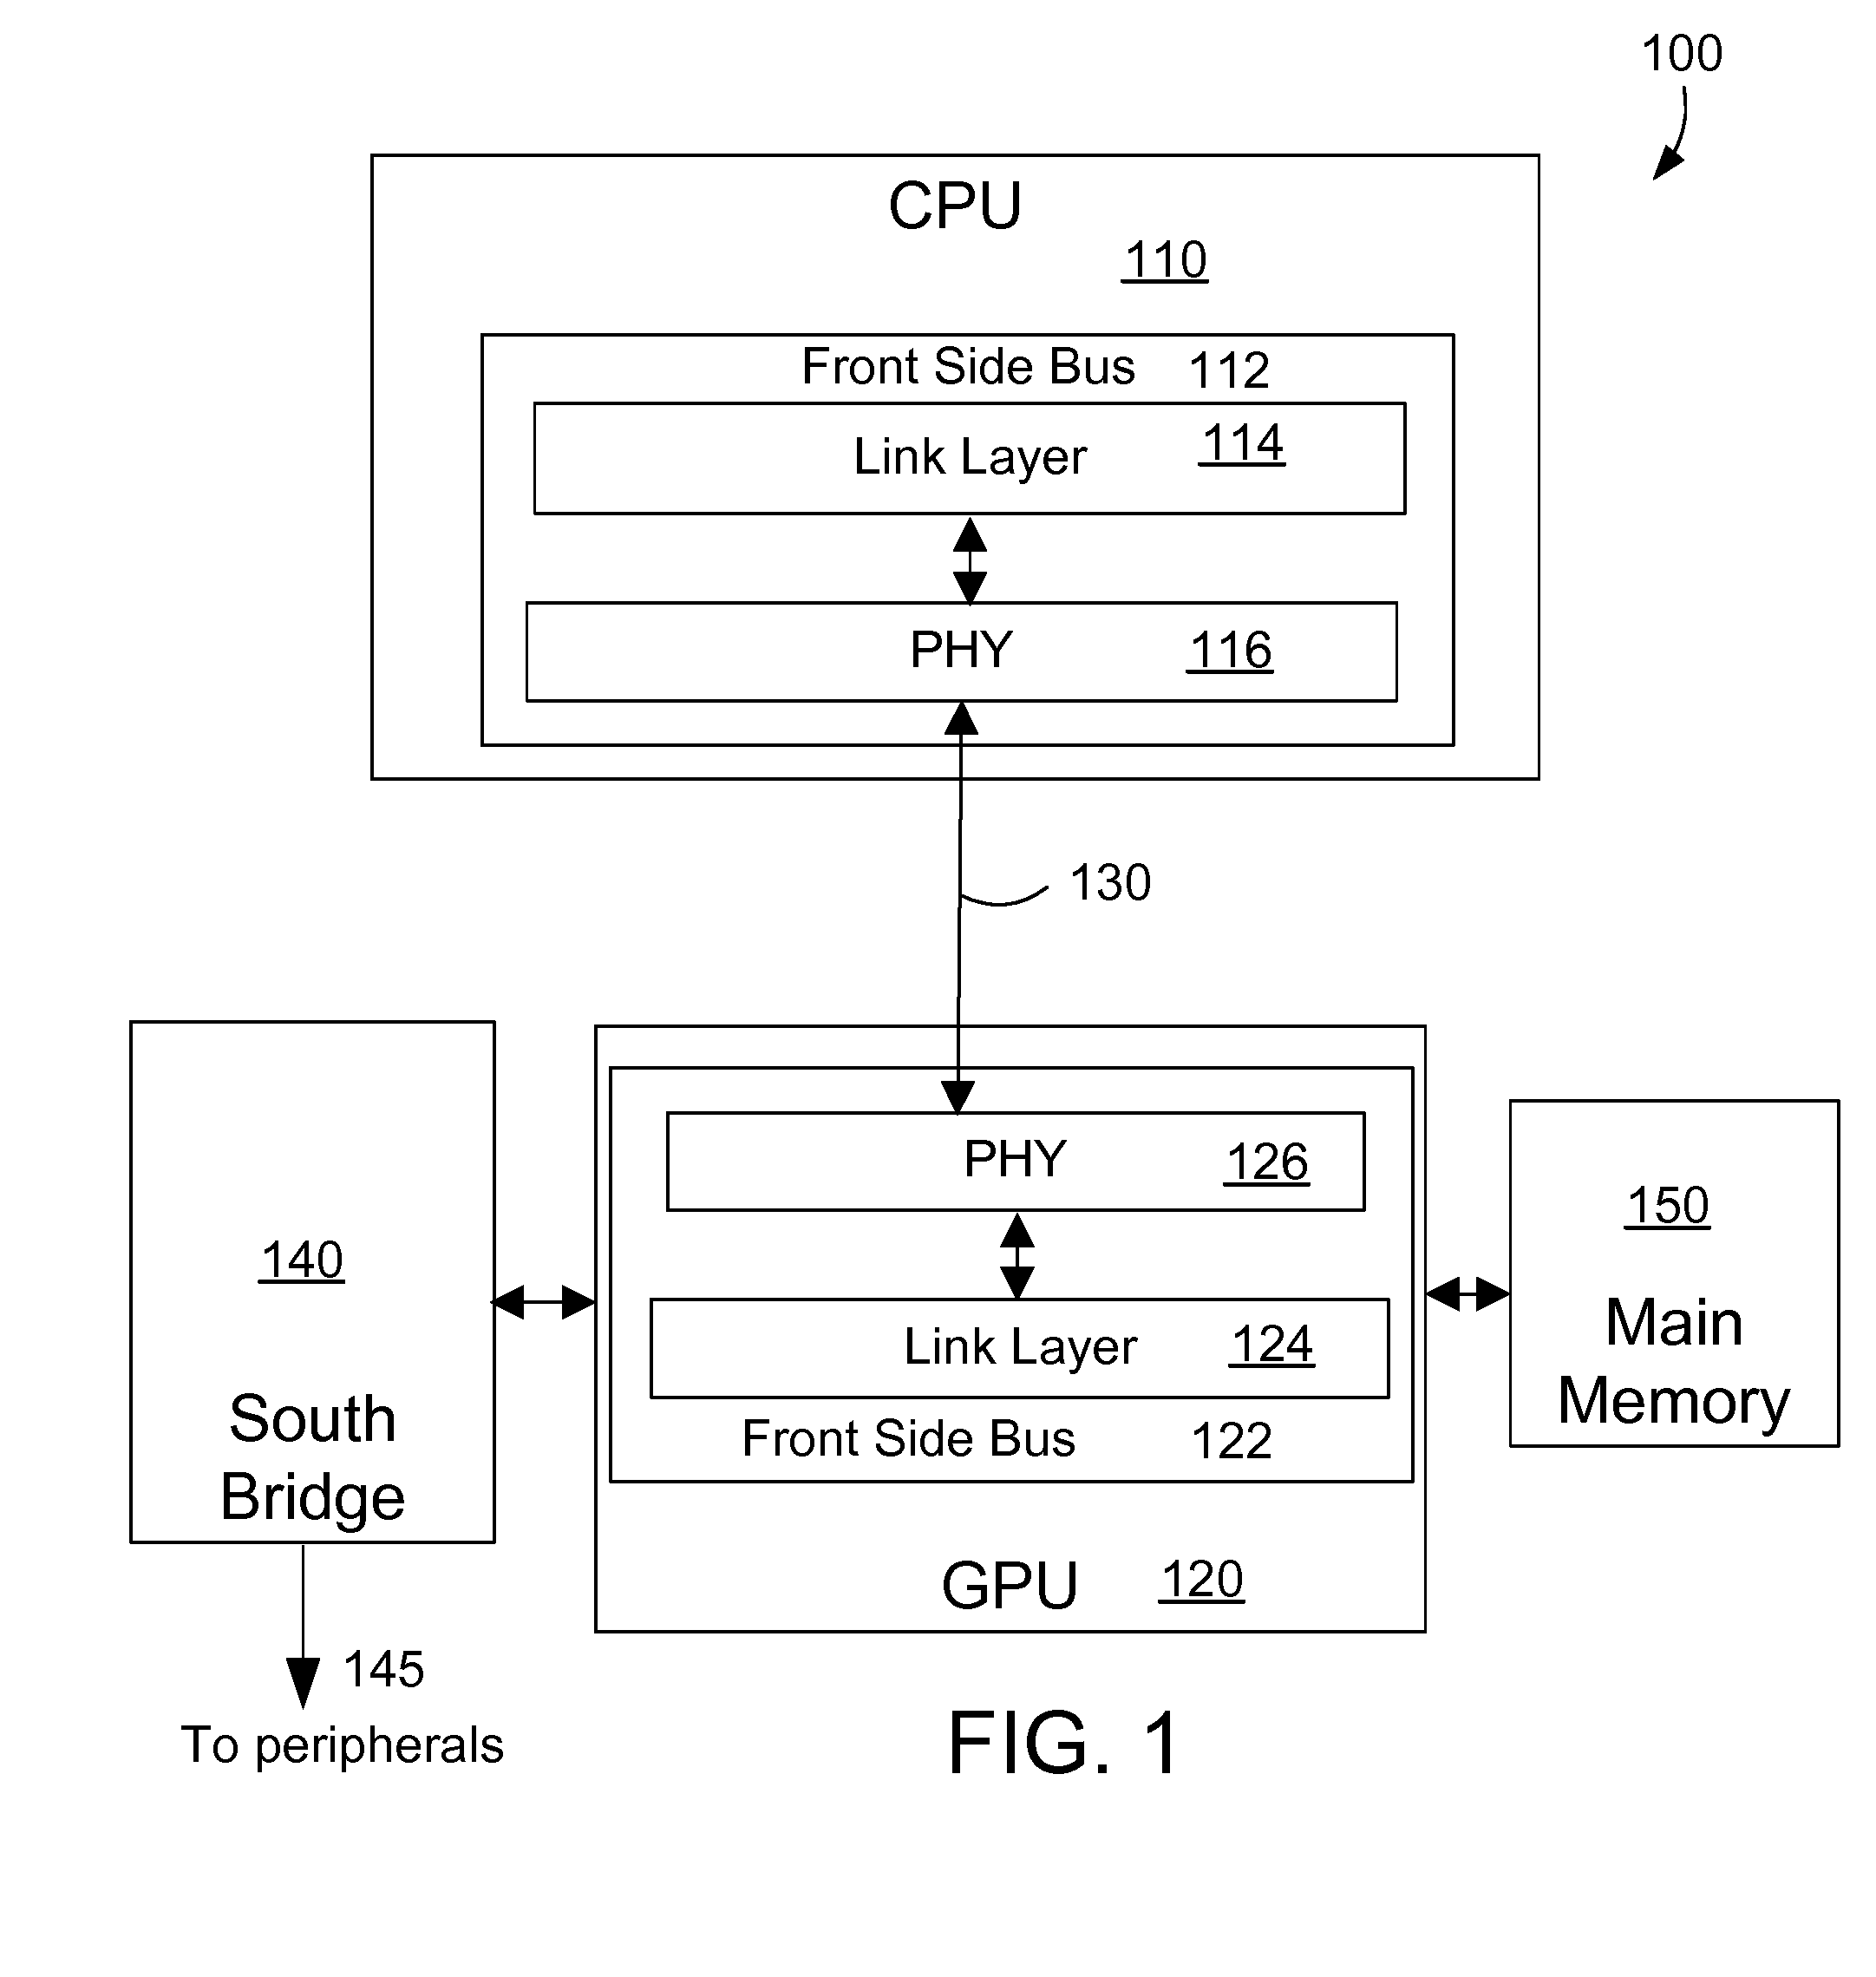 Architecture for a Physical Interface of a High Speed Front Side Bus